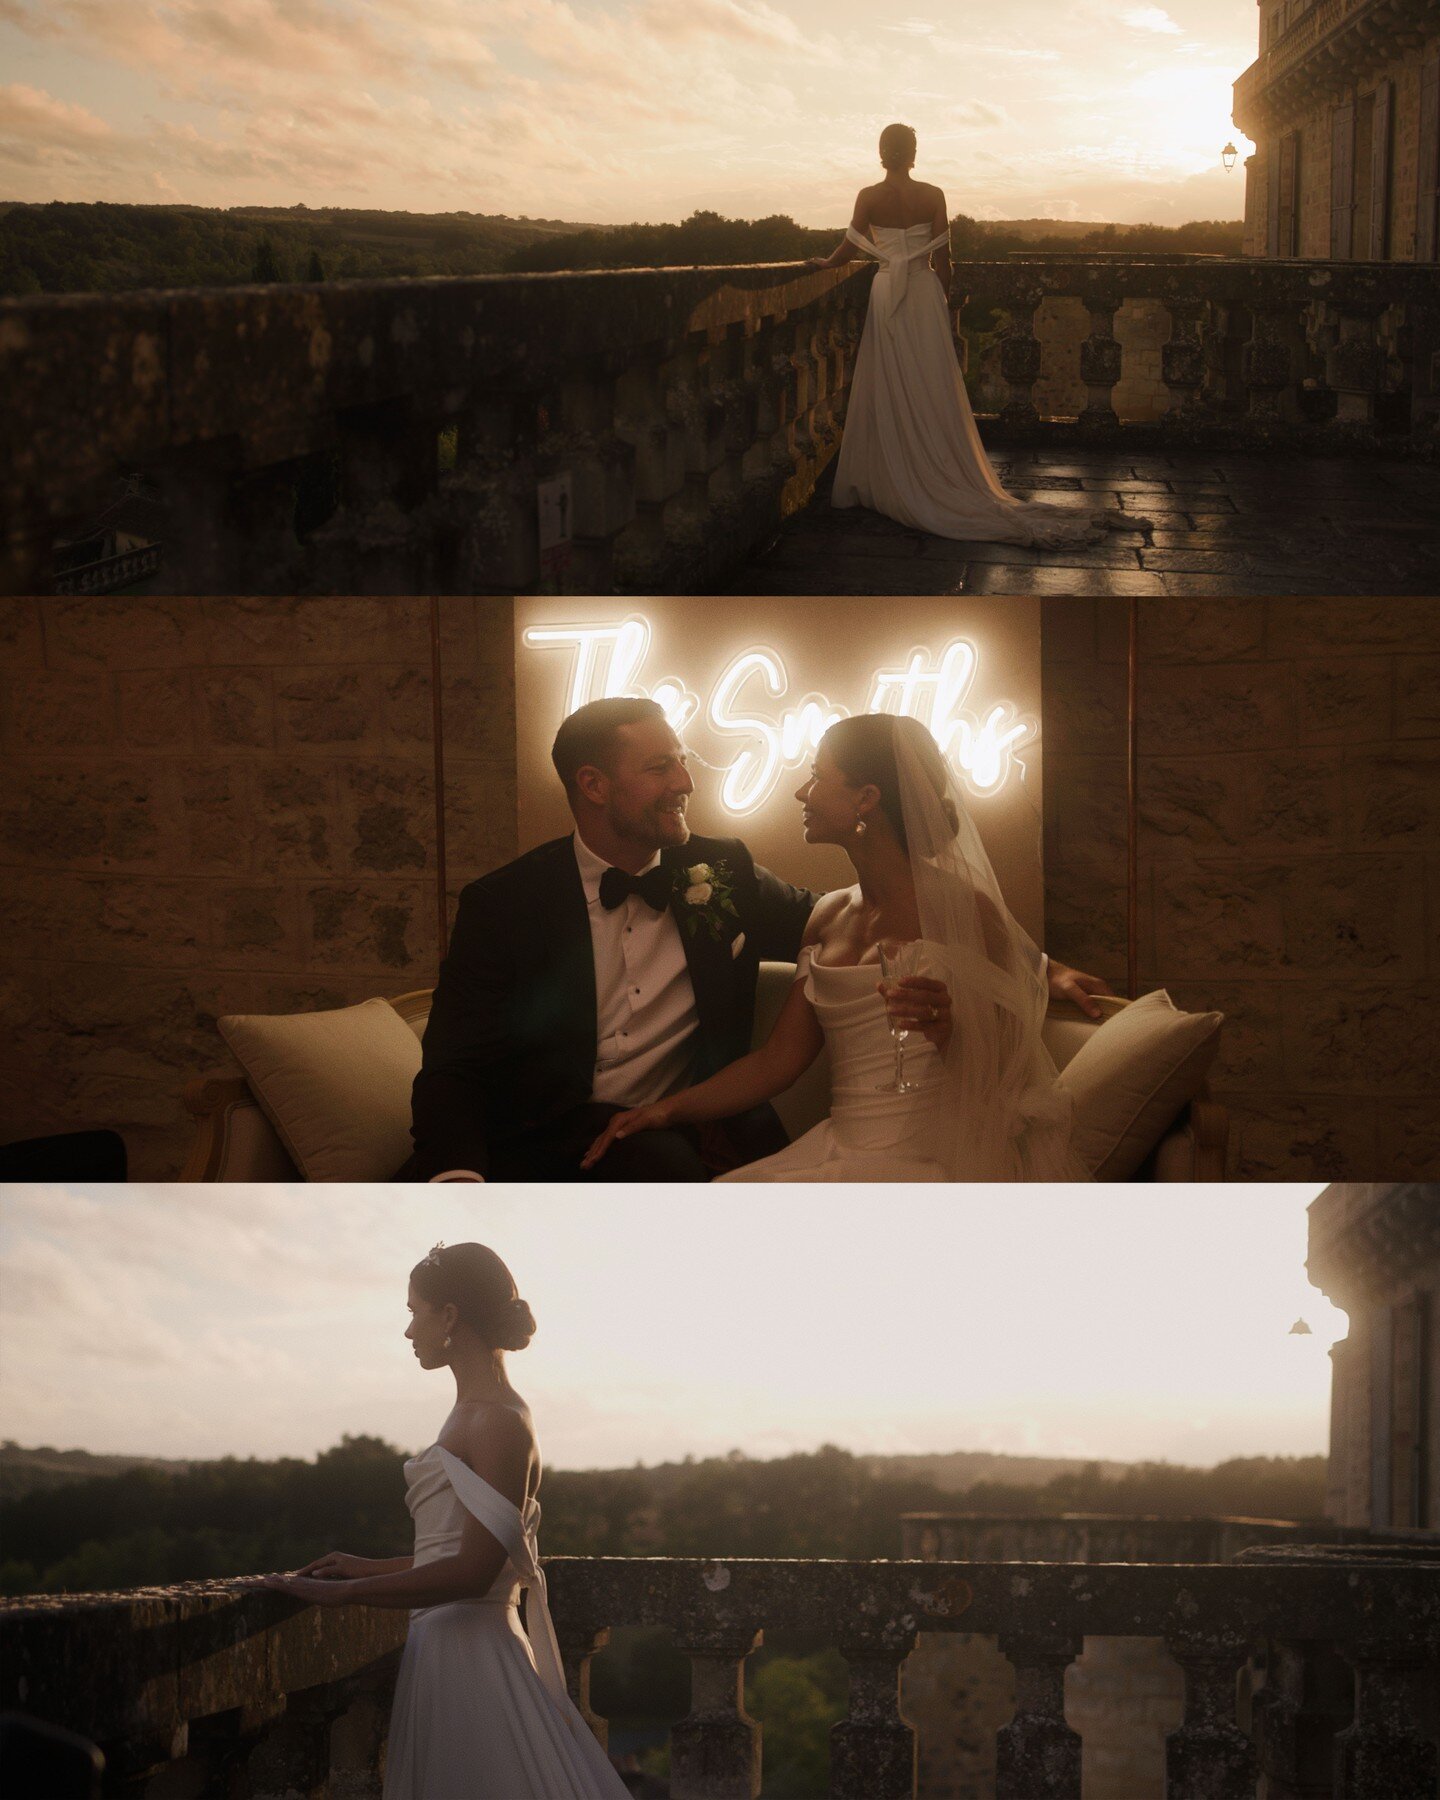 Back to last year with some beautiful memories from Jessica &amp; Tom's wedding, before starting to reveal the new season 2022.
An oustanding english wedding in the Château de Poudenas. 
Full wedding film on the link bio or on www.playandfeel.com 

